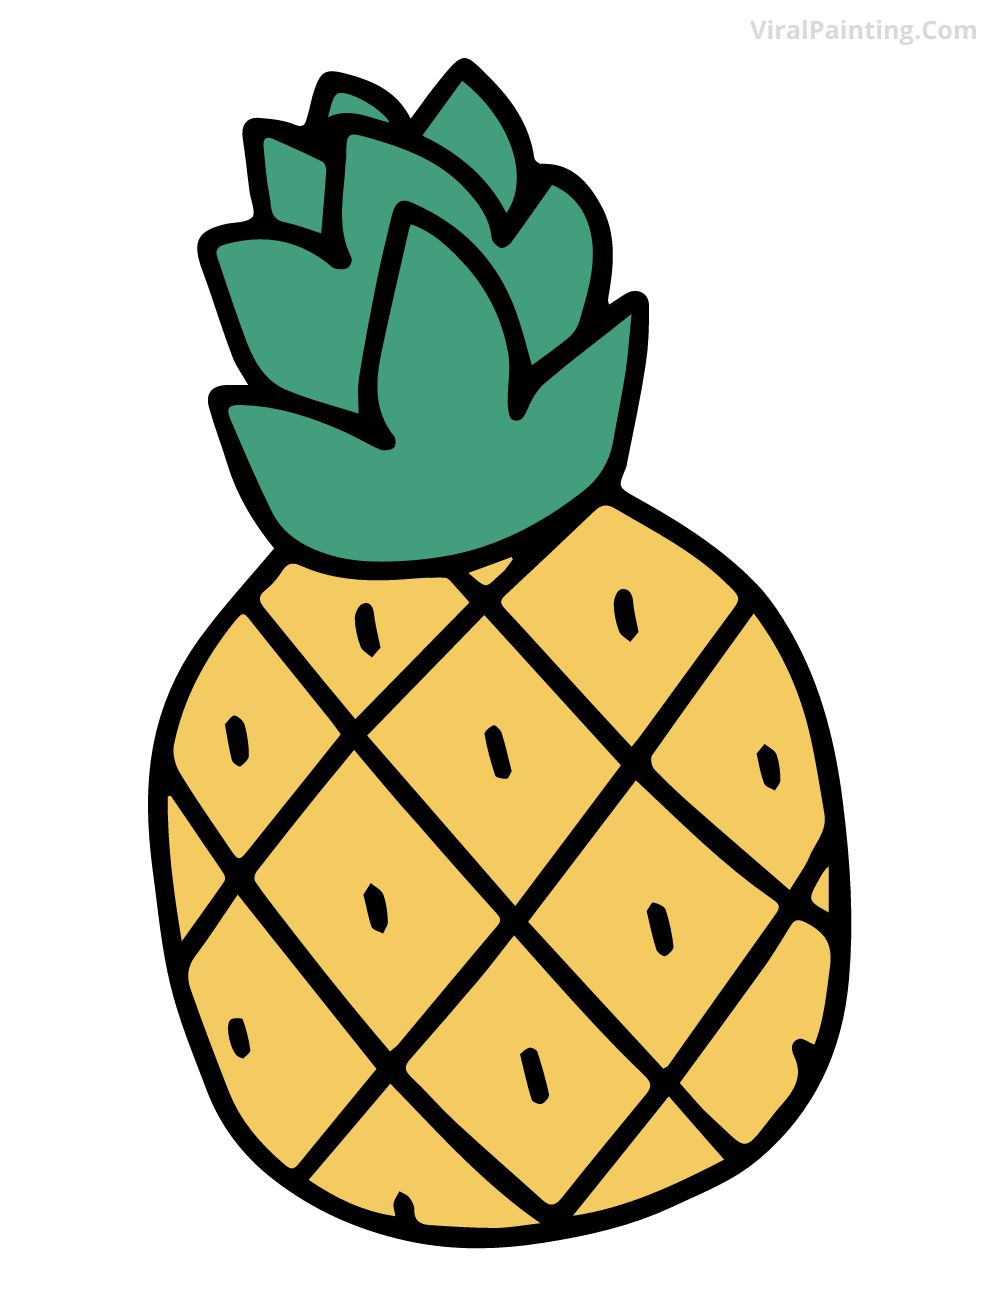 Simple and Easy pineapple drawing ideas for kids (3)